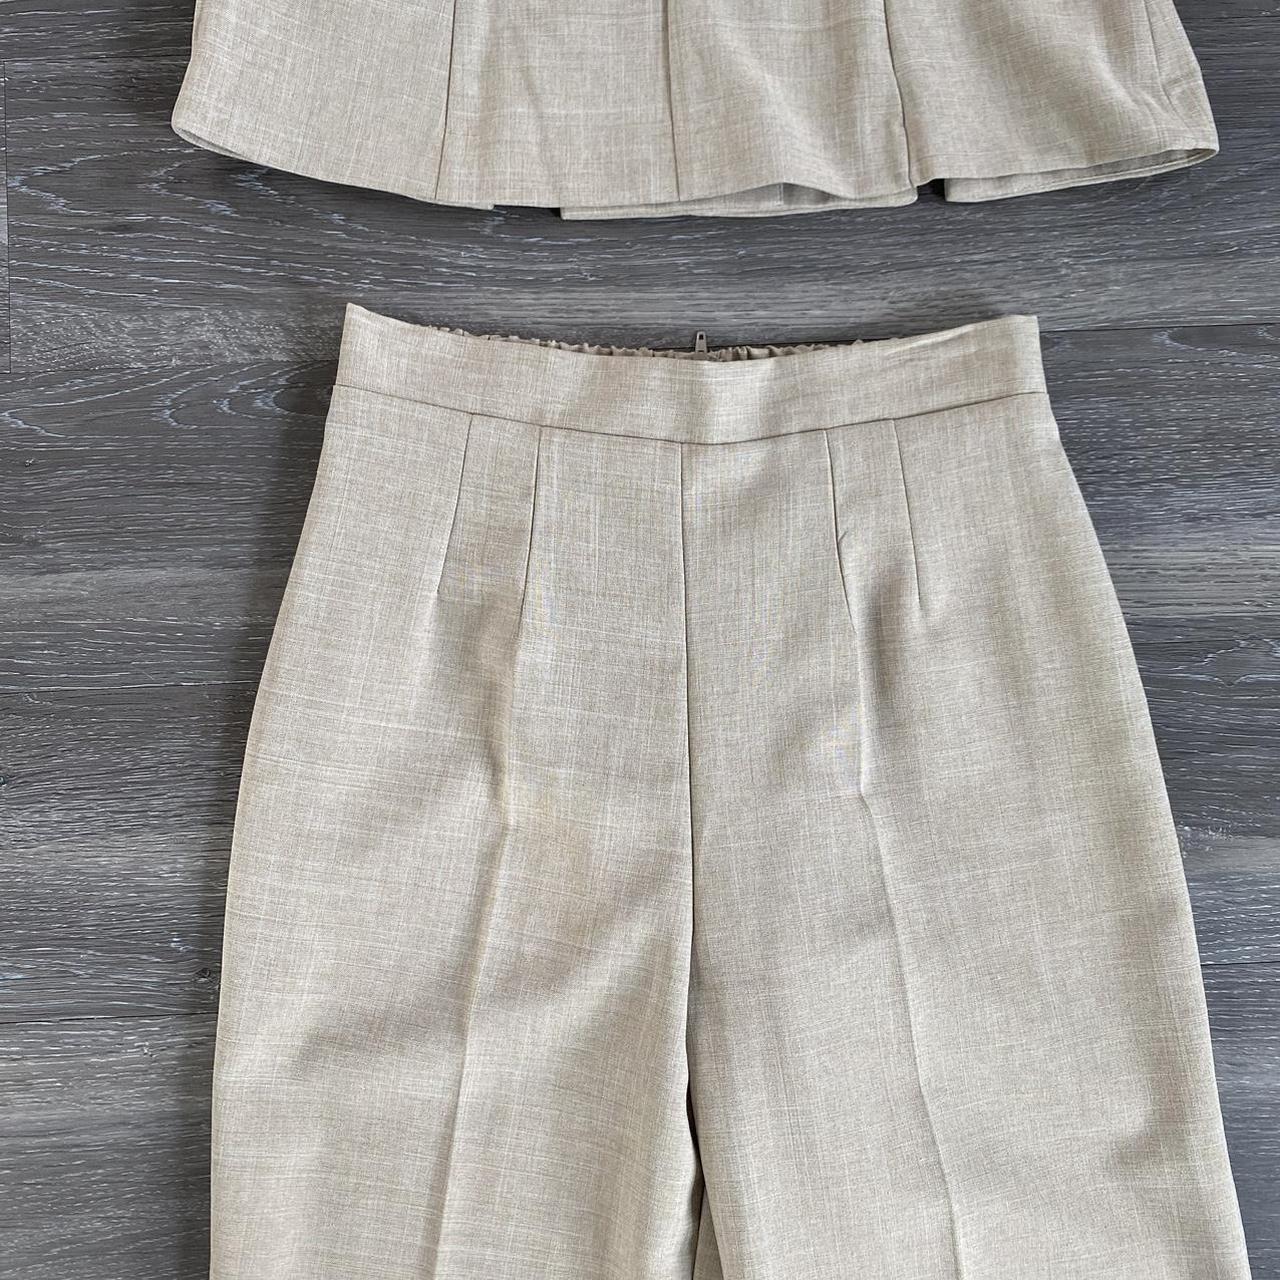 American Vintage Women's Tan and Cream Suit (3)